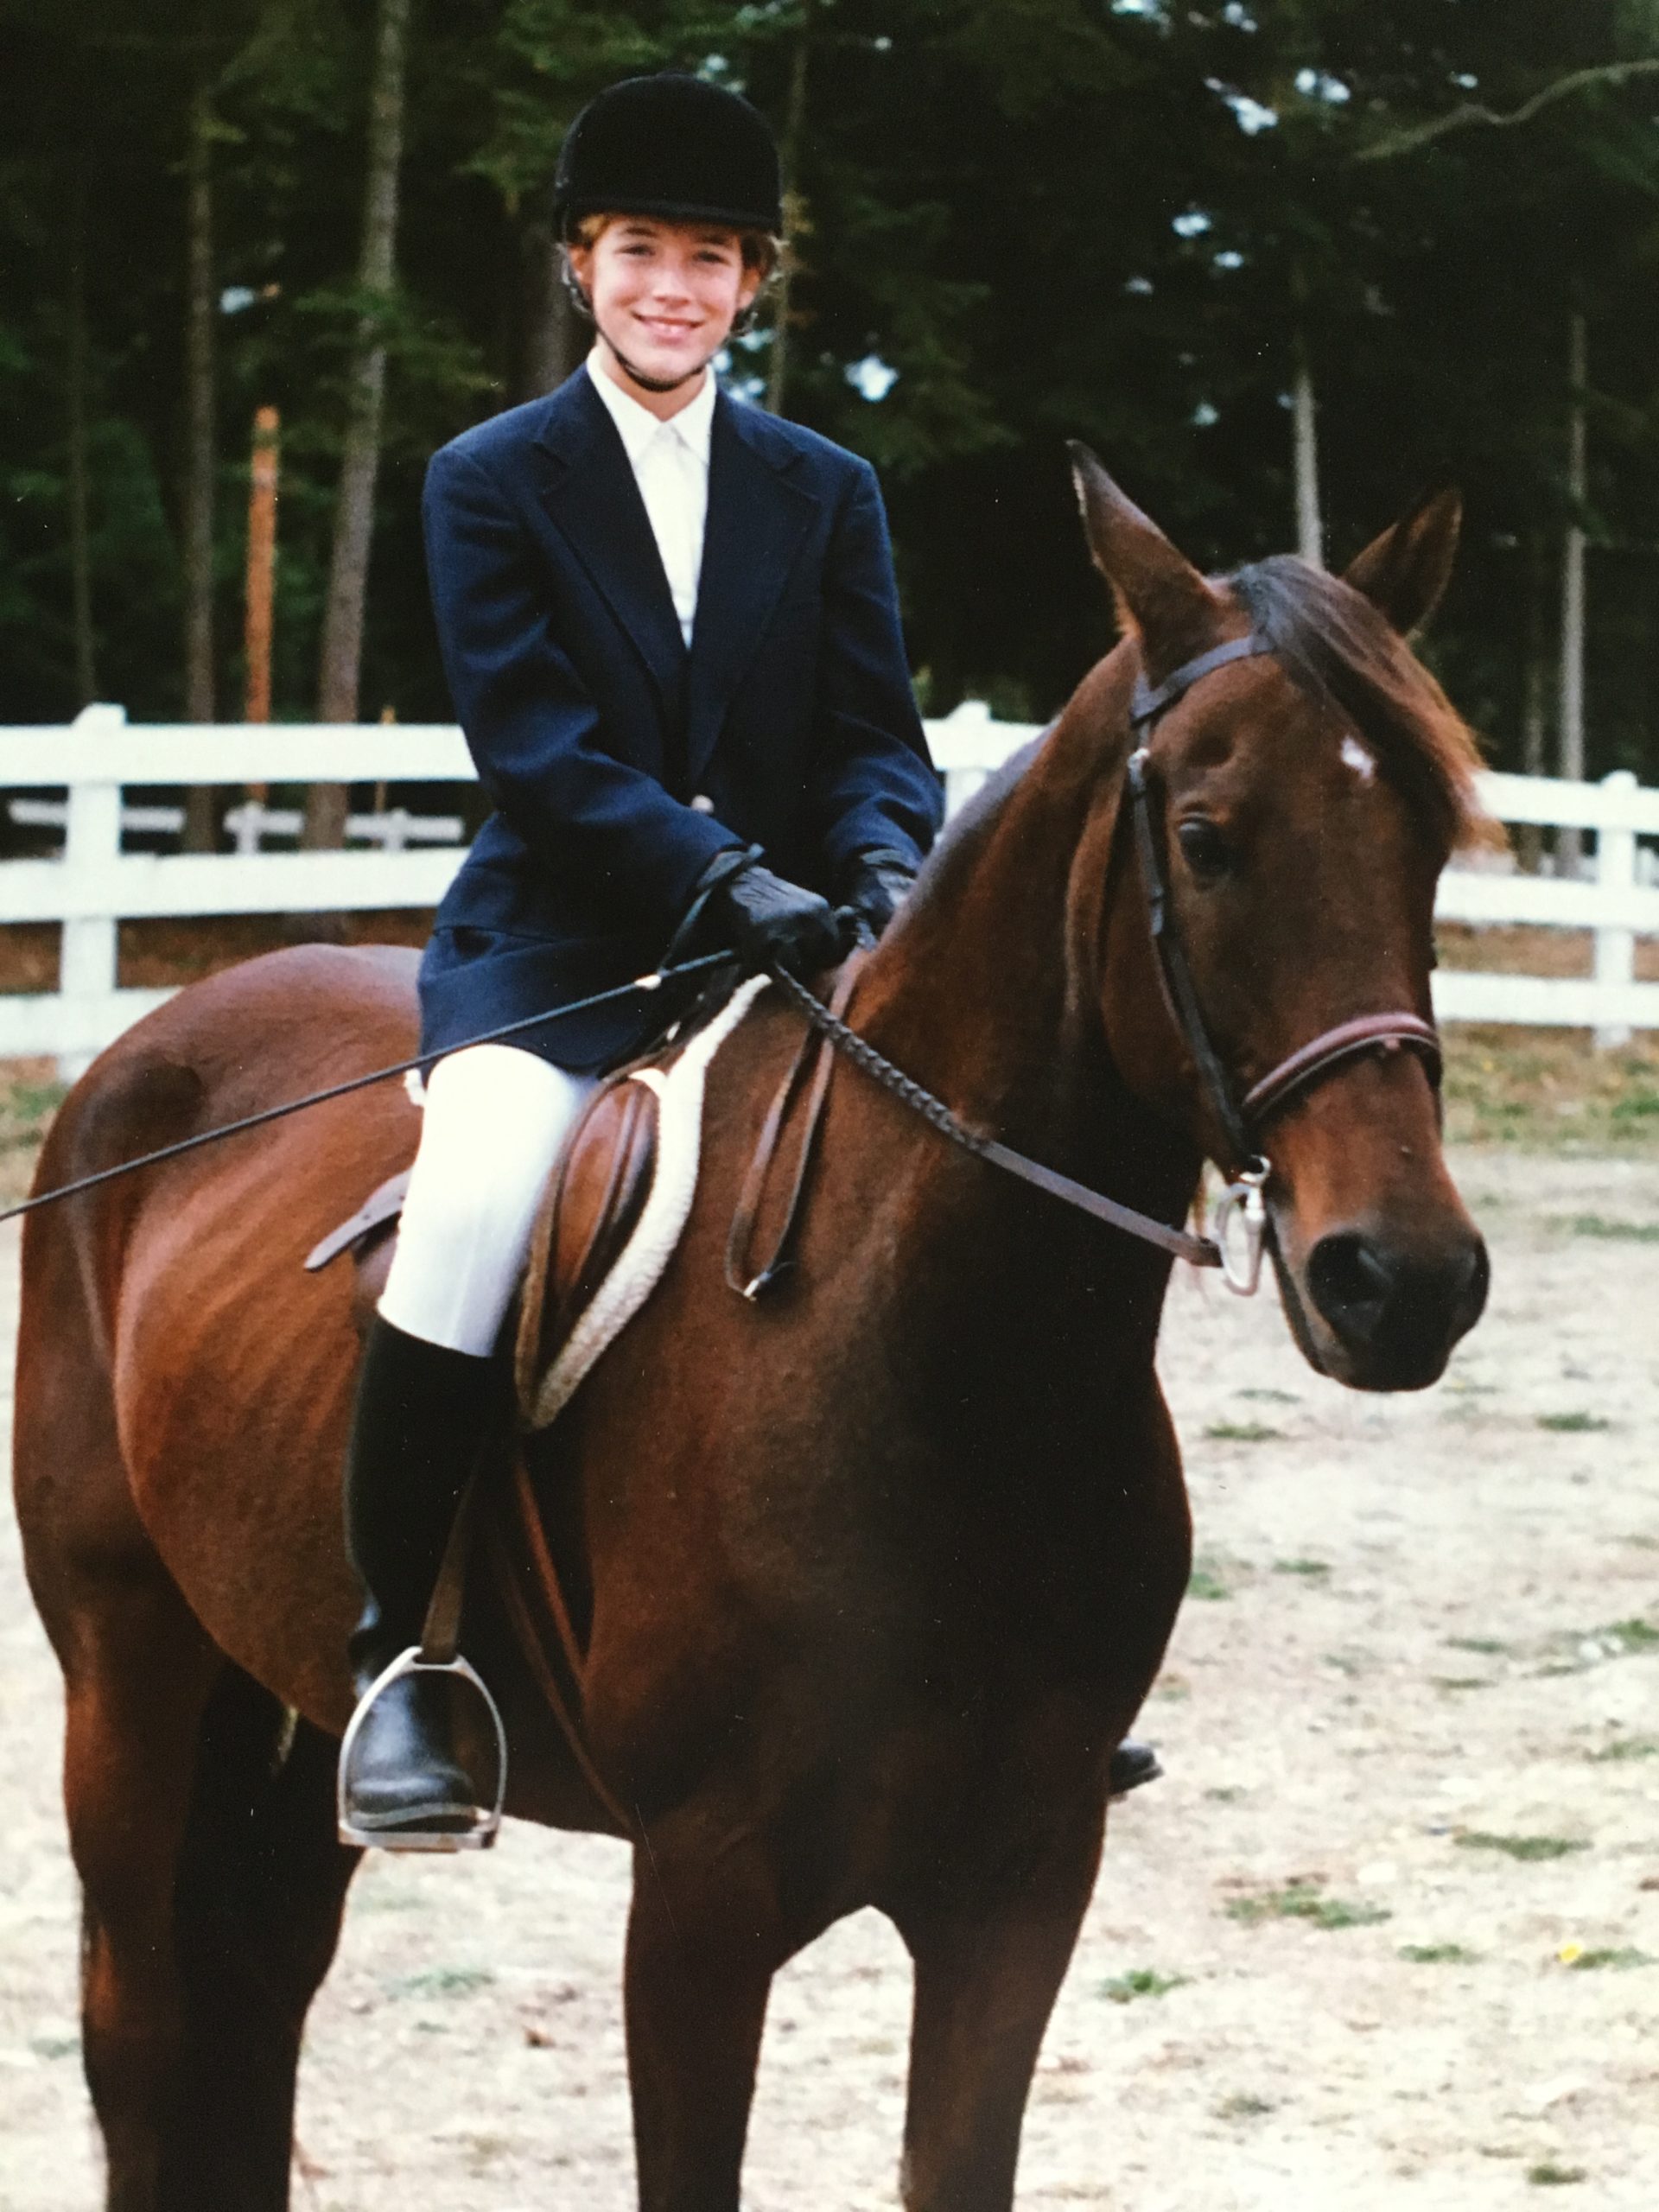 Heidi, an early cochlear implant recipient, on a horse